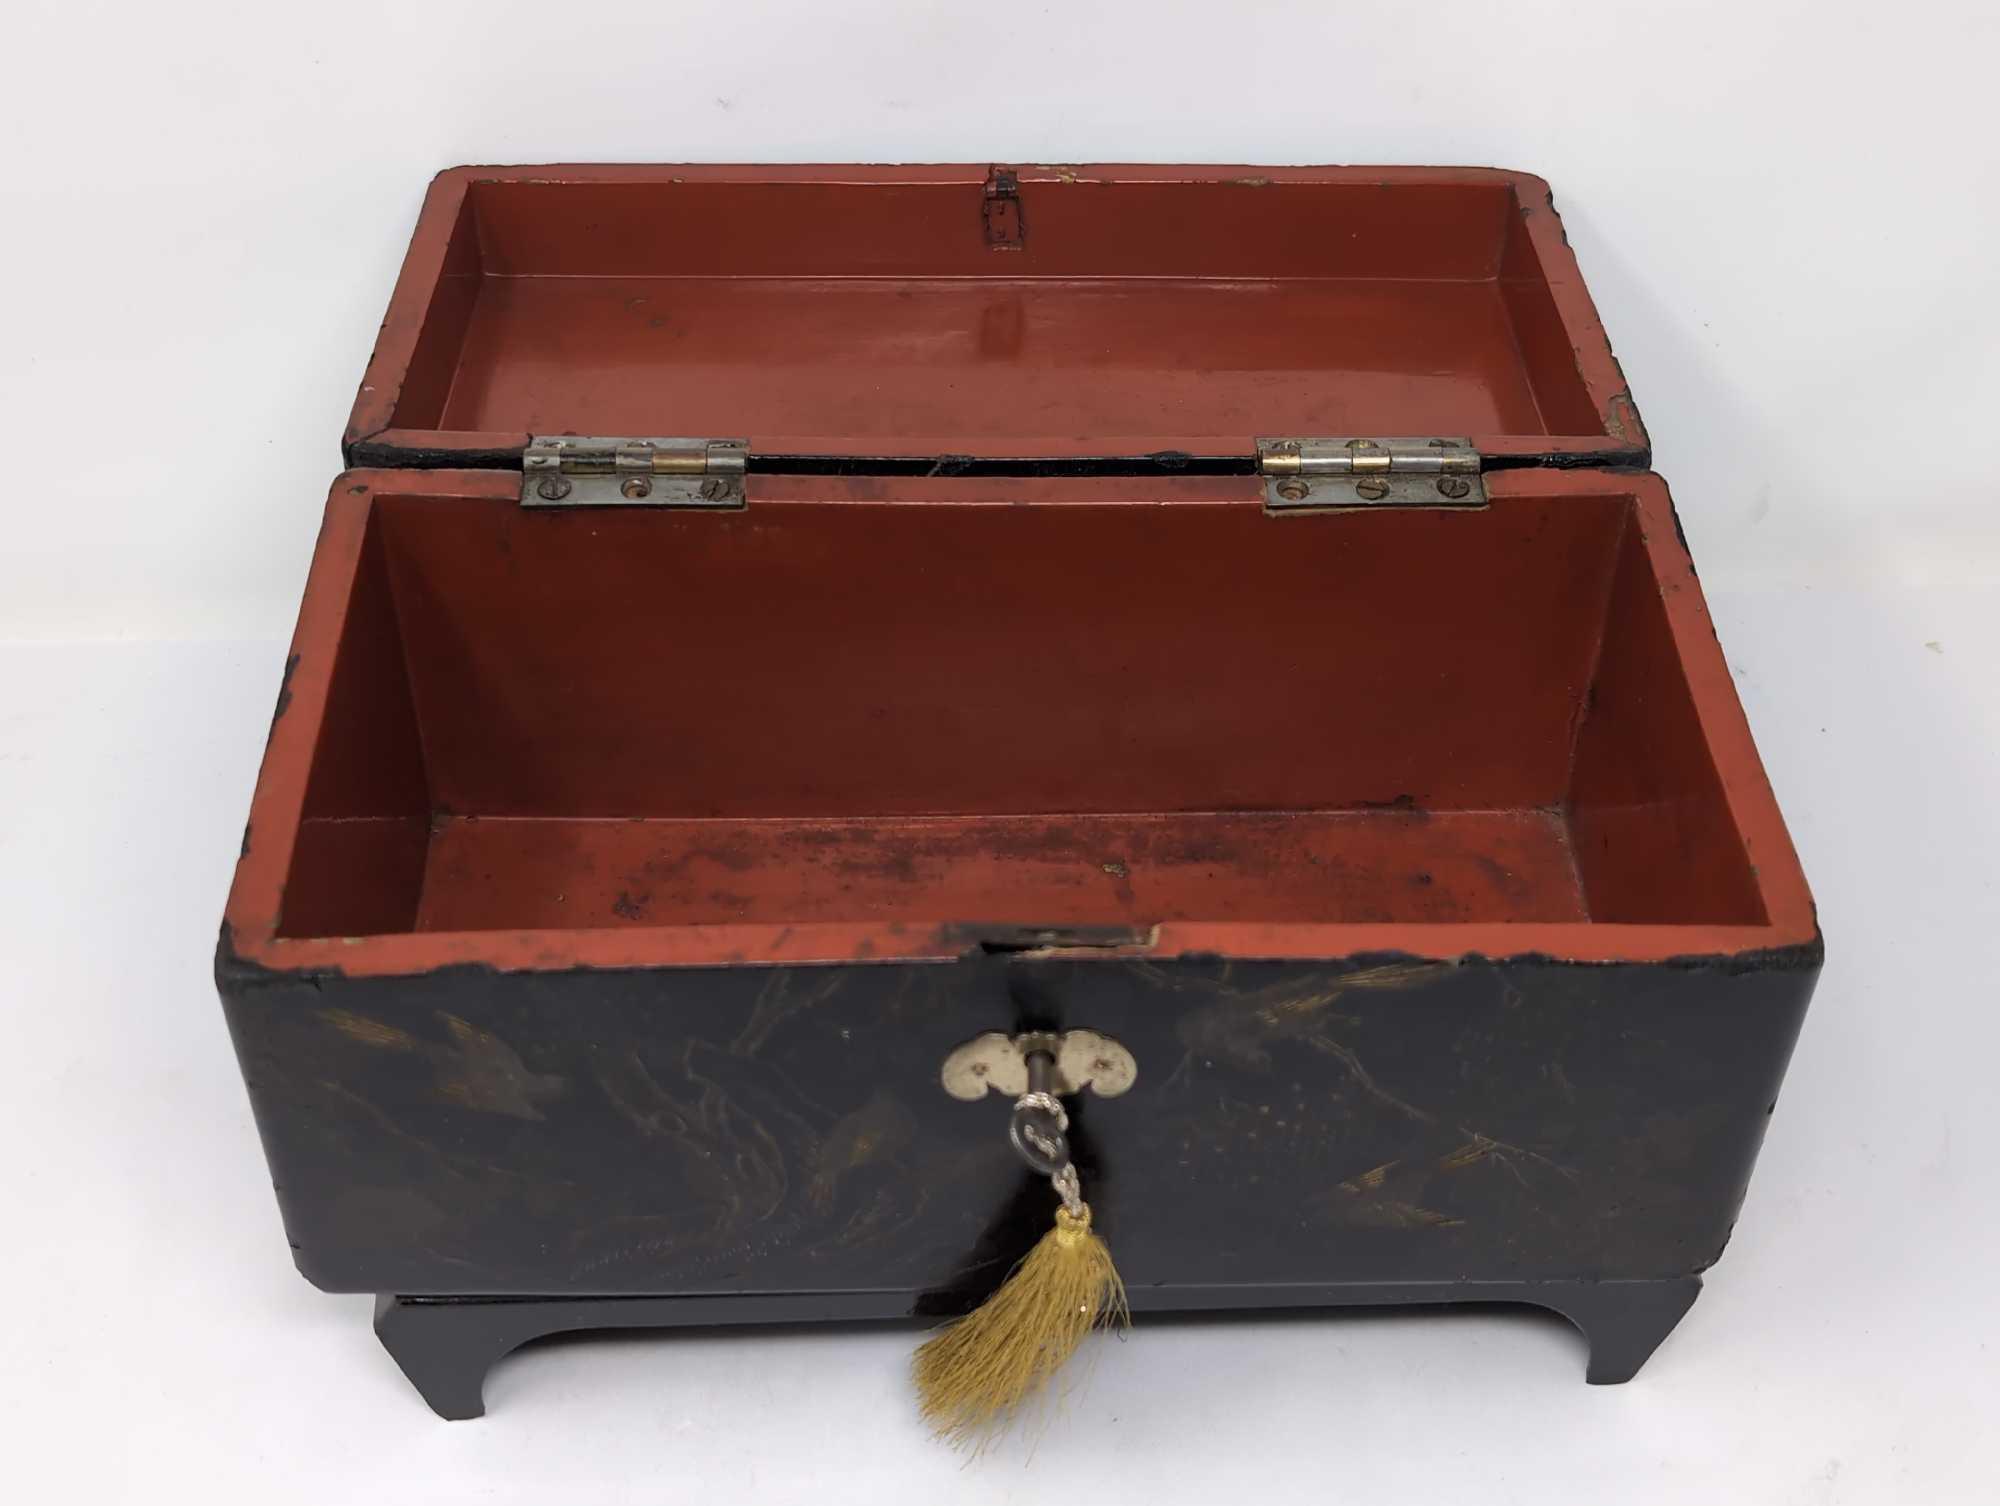 (FOYER) ANTIQUE JAPANESE BLACK LACQUERED STORAGE BOX WITH GOLD BIRD/TREE DETAILS & RED PAINTED